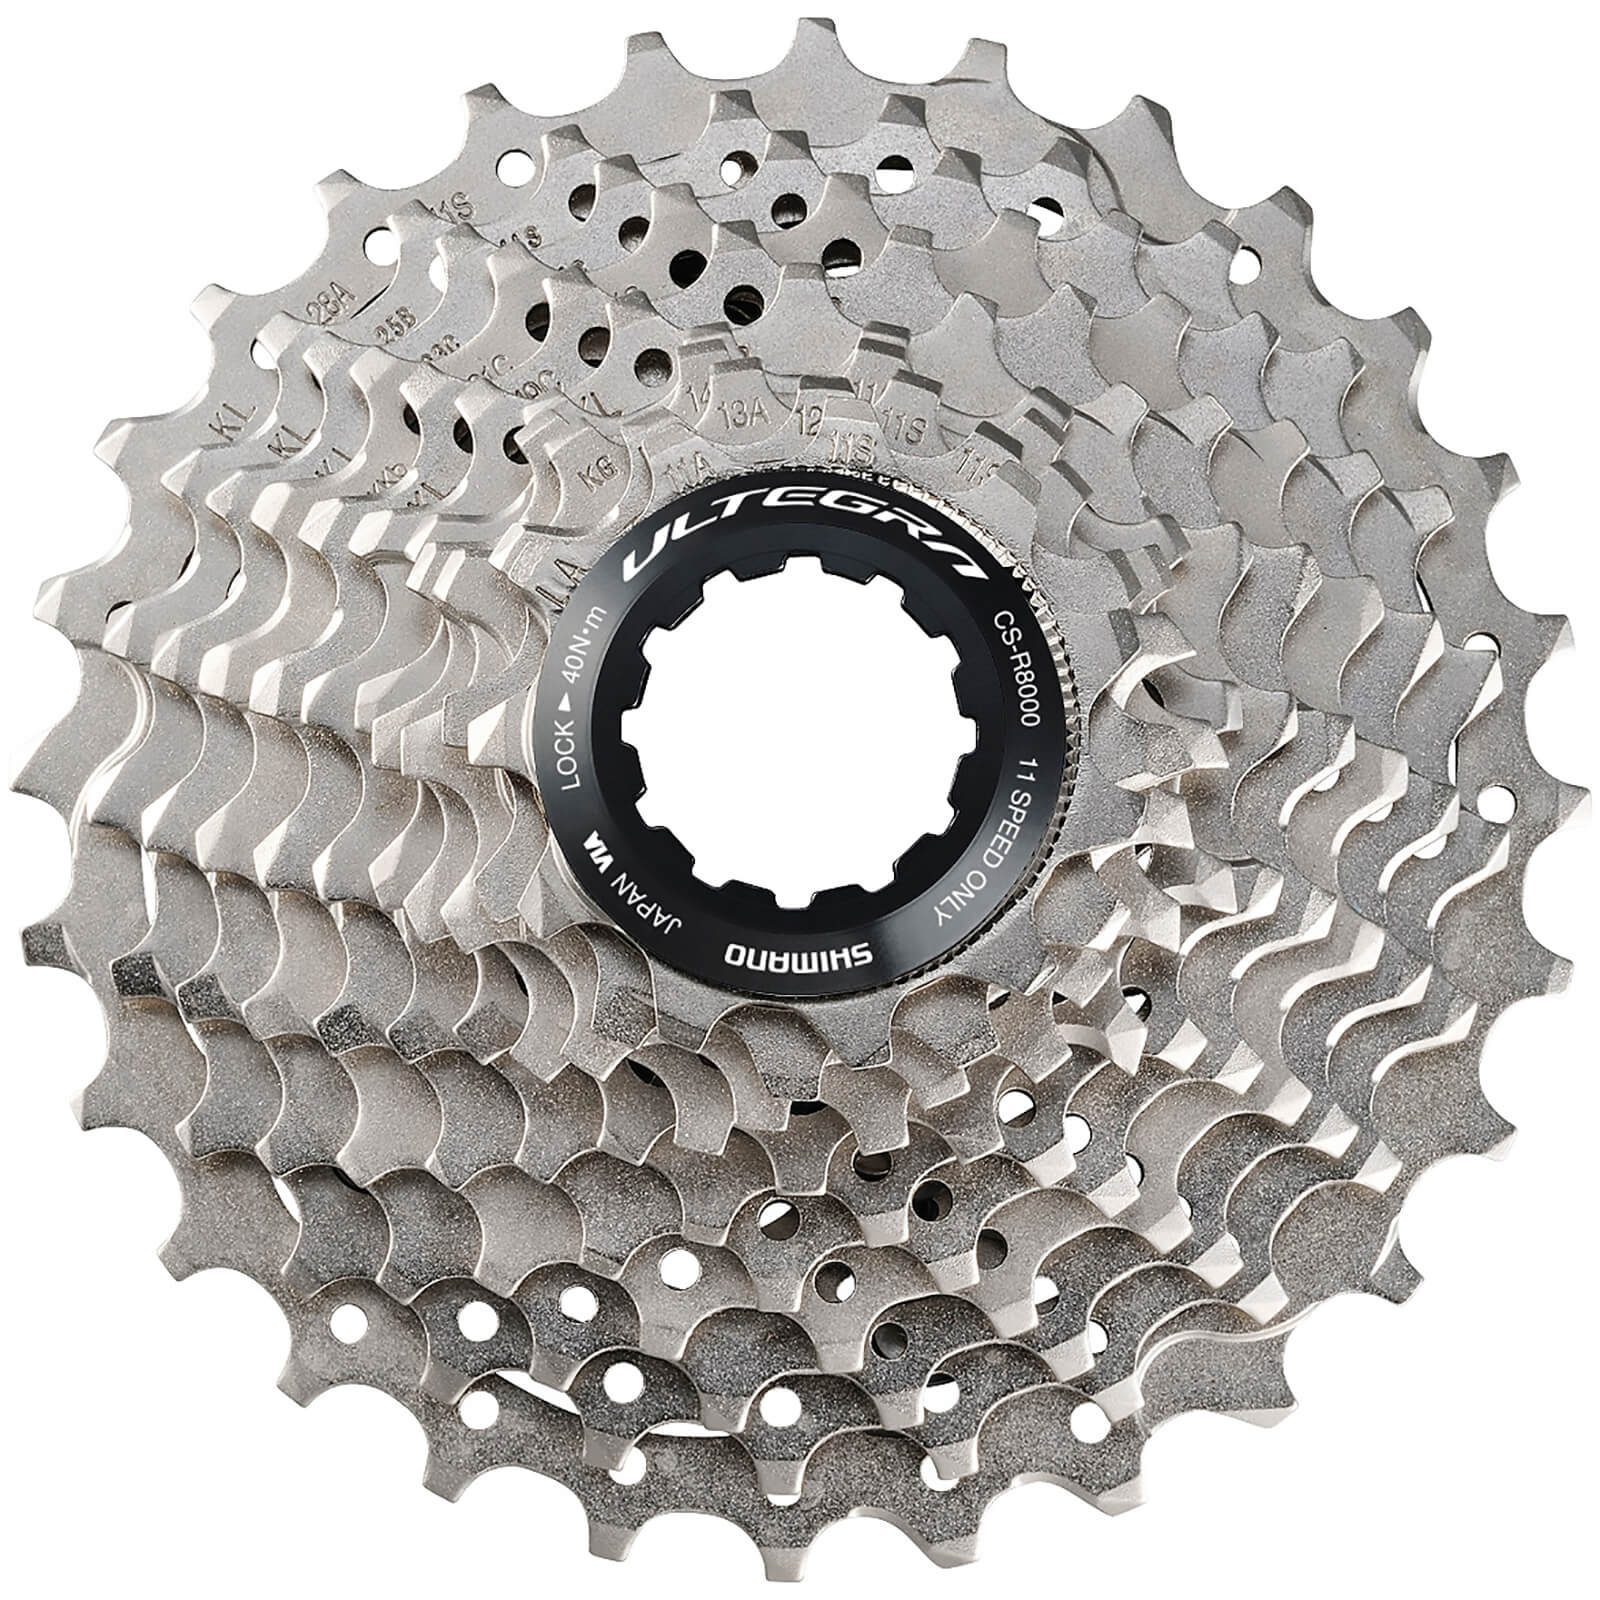 Image of Shimano CS-R8000 Ultegra 11-Speed Hyperglide Cassette 11-28T in Silver | Rutland Cycling